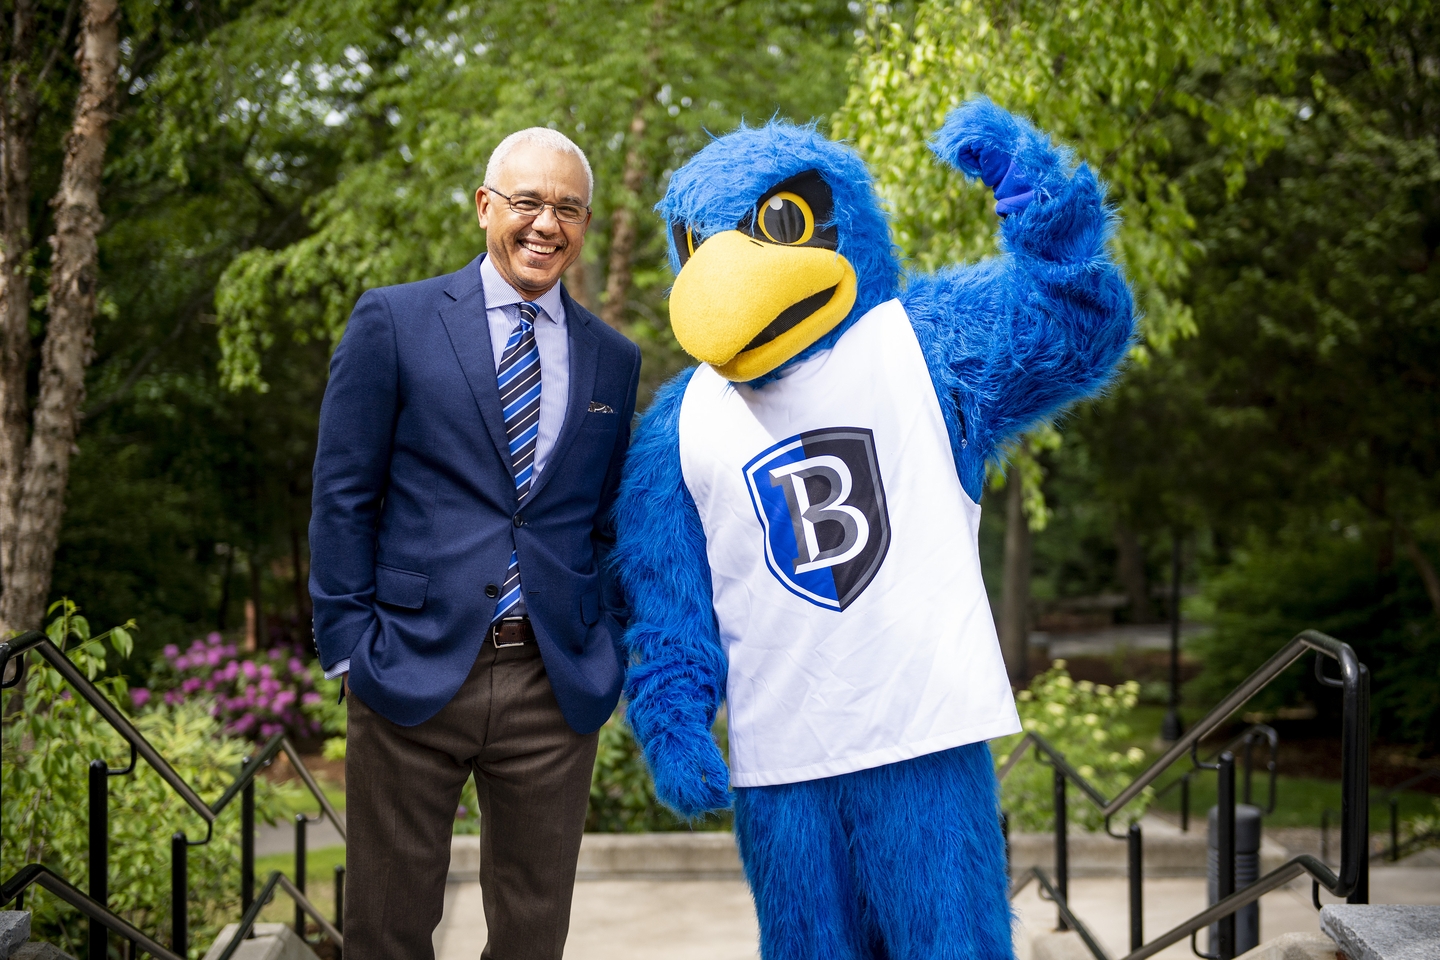 President Chrite poses with Flex the Falcon.